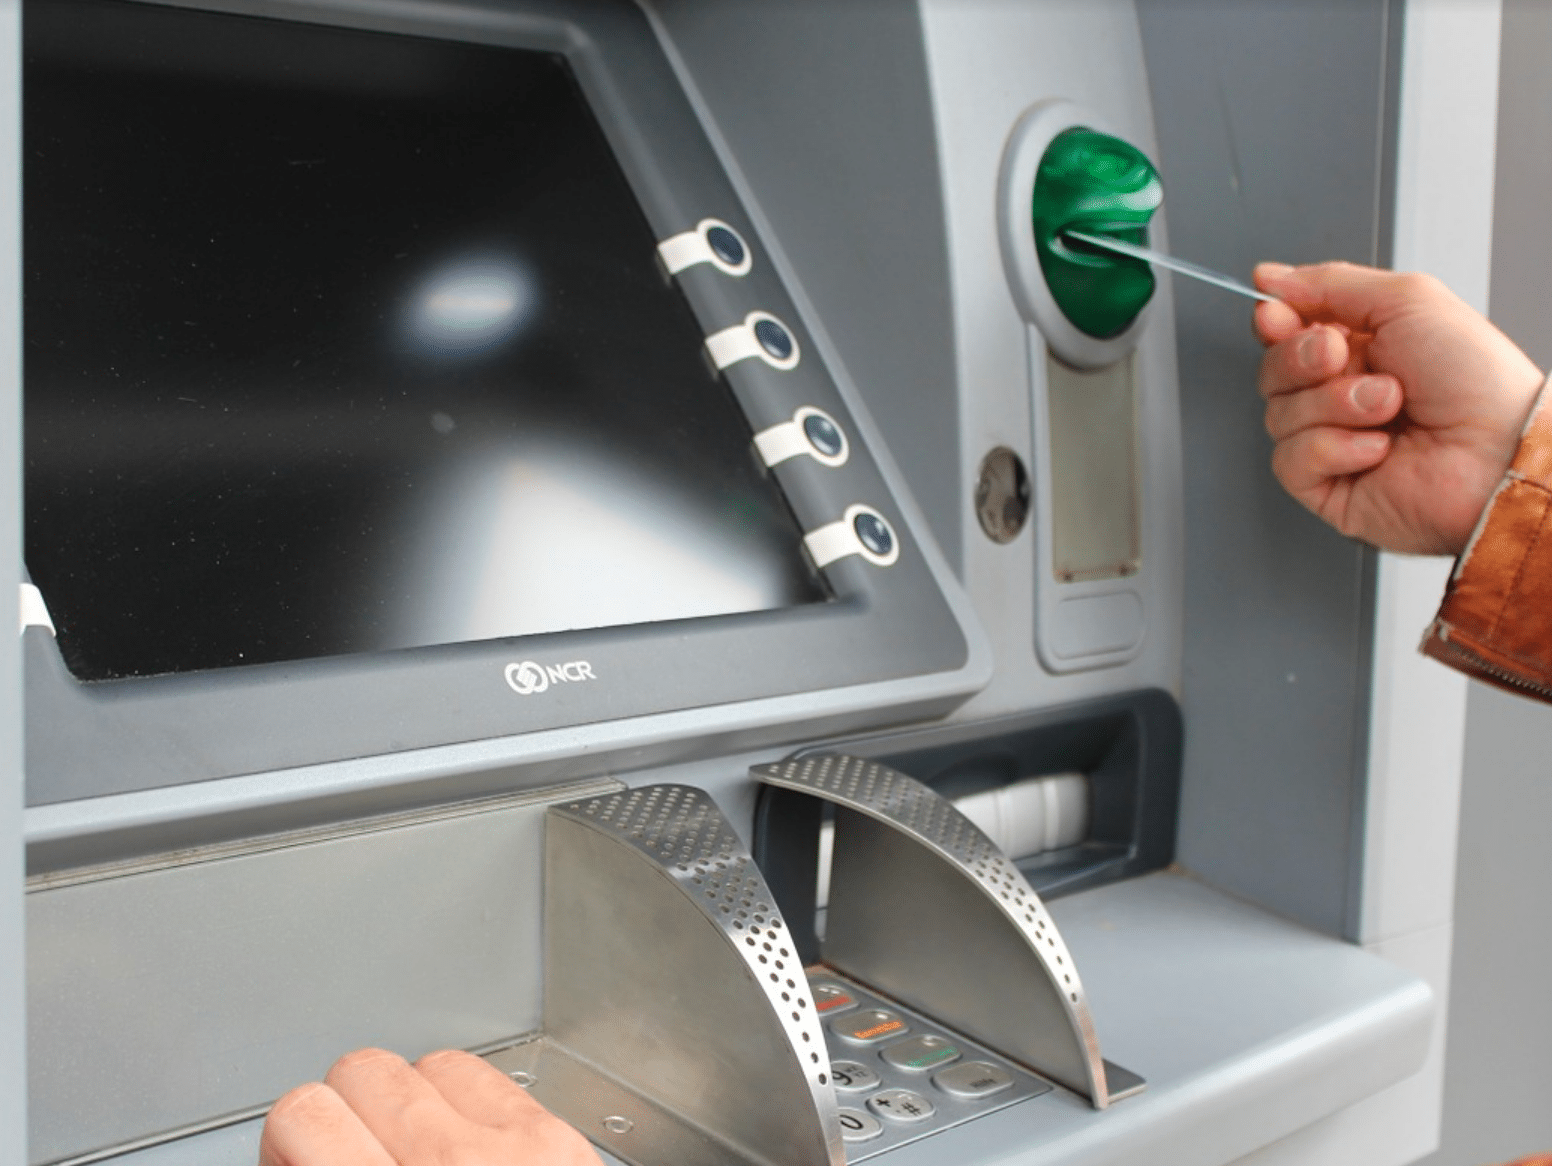 starting and growing an atm business